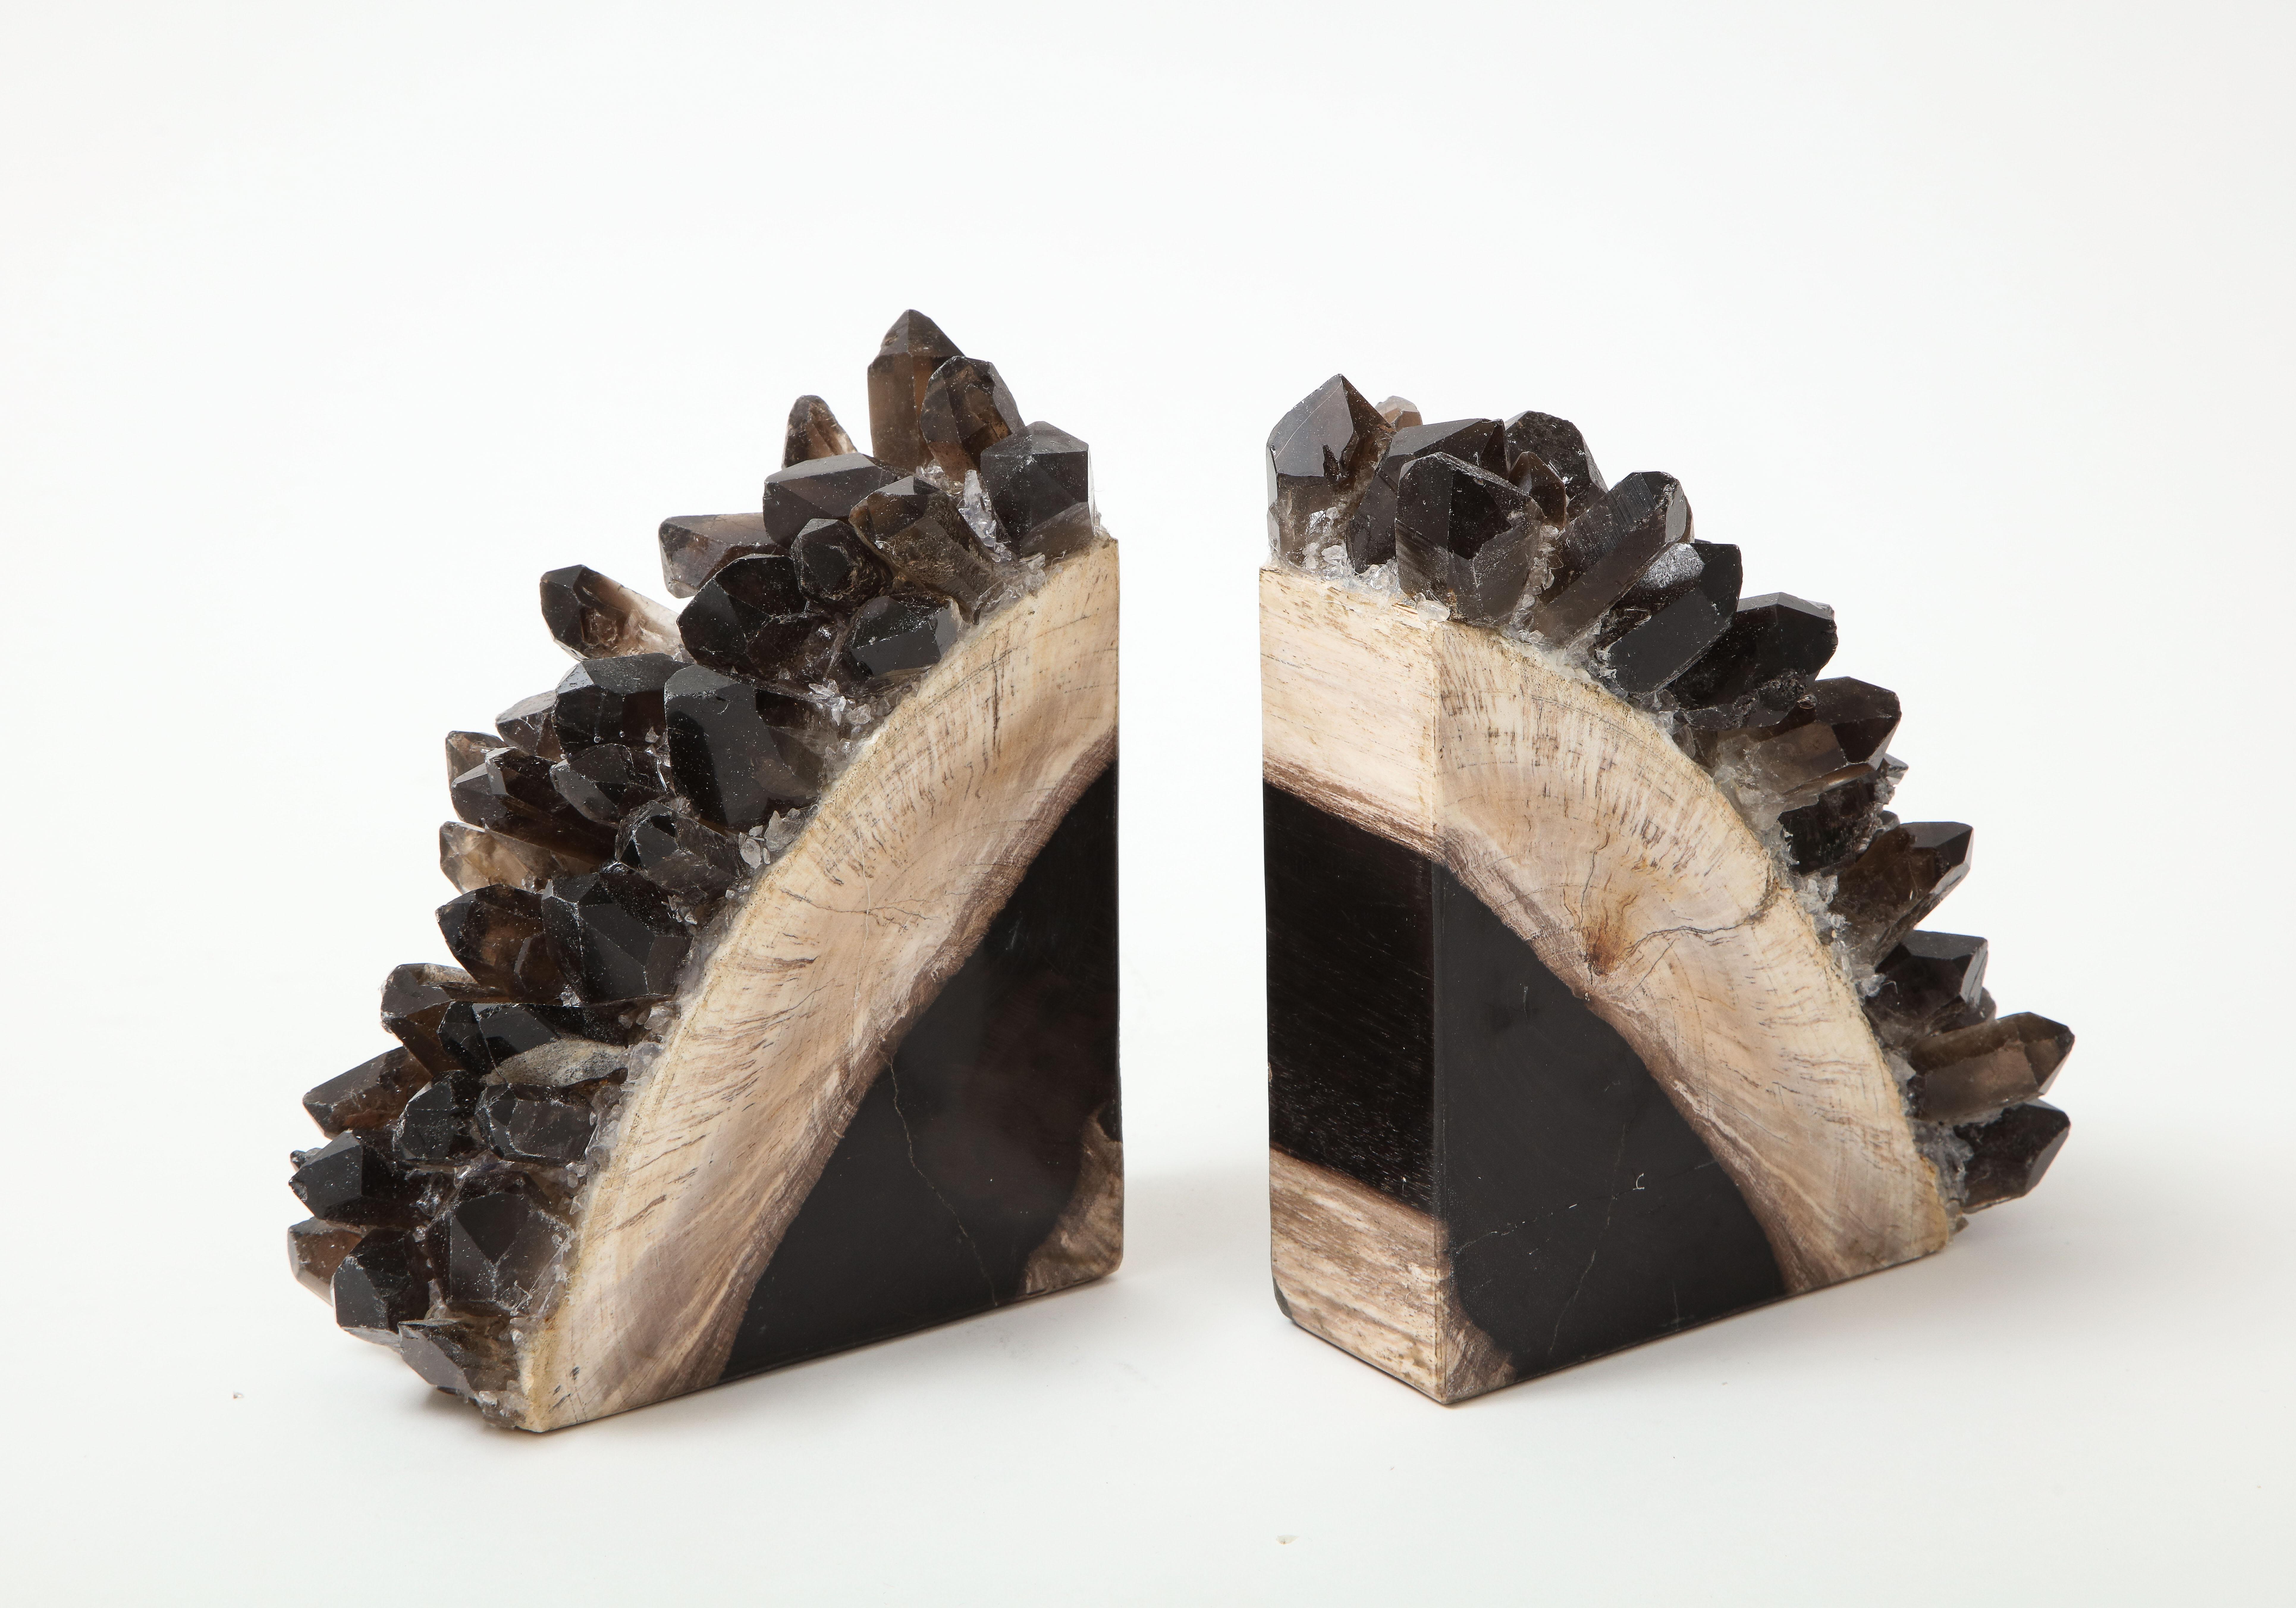 Set of eye catching bookends featuring petrified wood slices in black and natural coloring with black quartz accents.